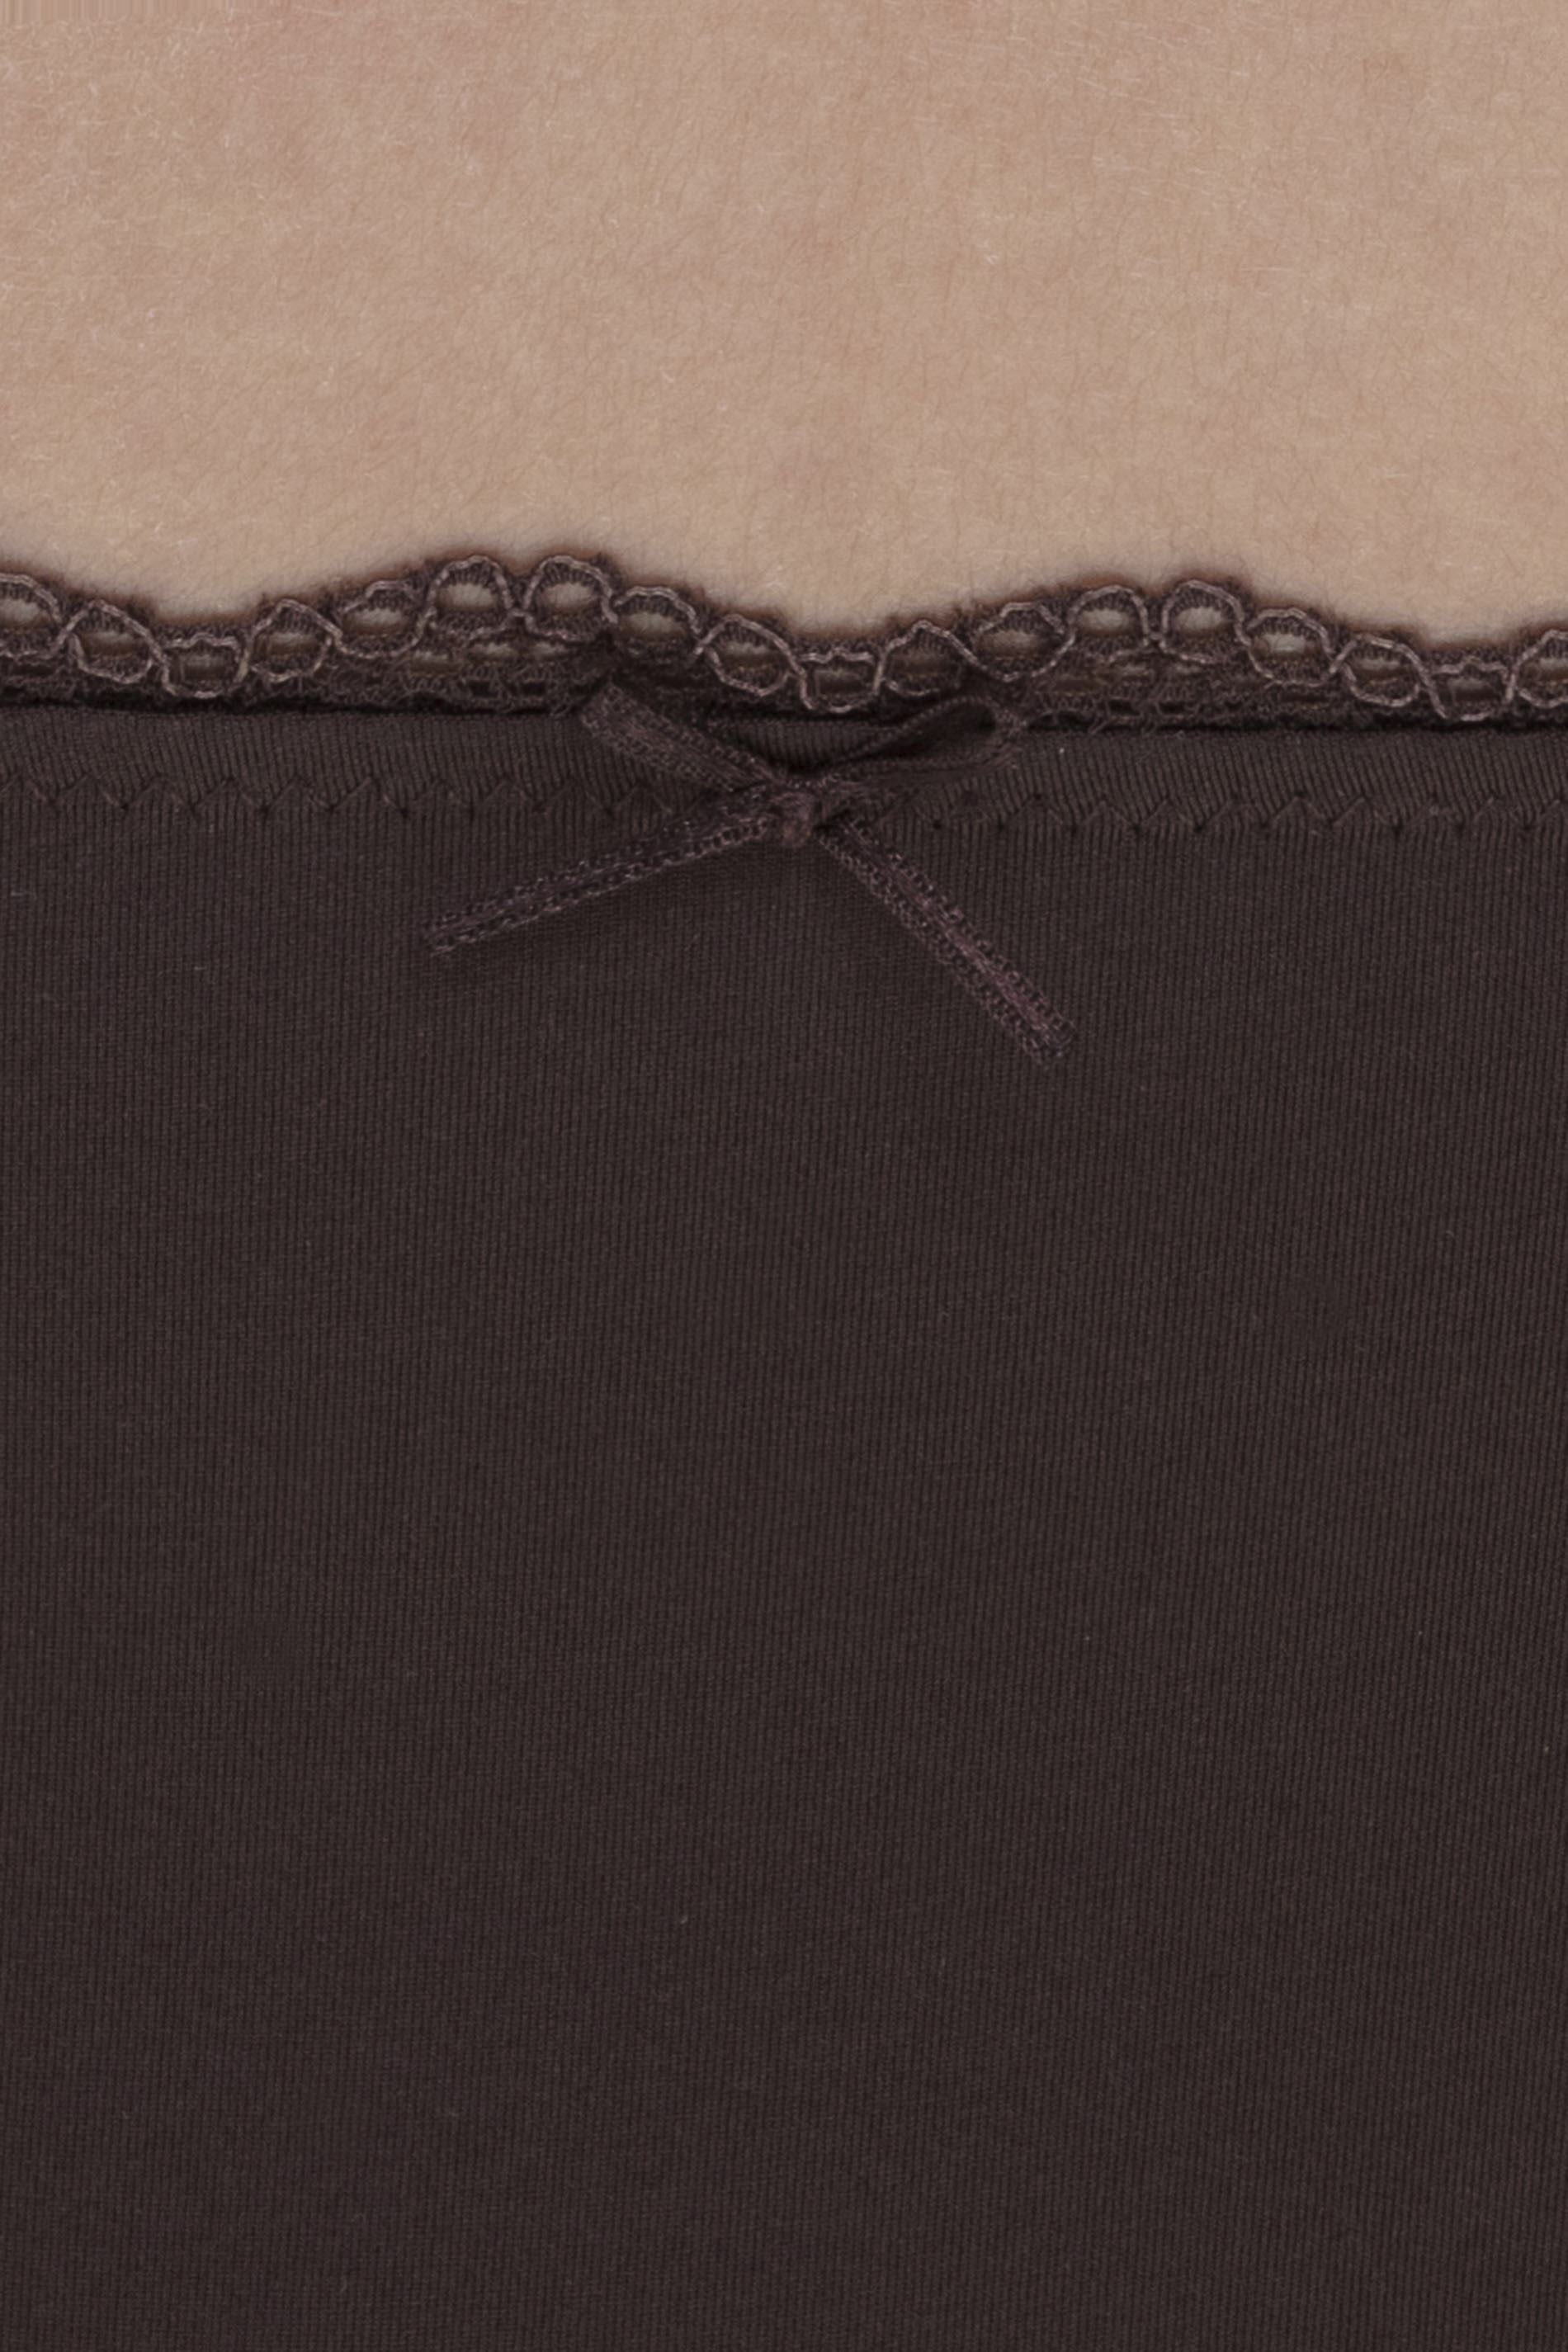 Hipster Liquorice Brown Serie Amorous Detailweergave 01 | mey®